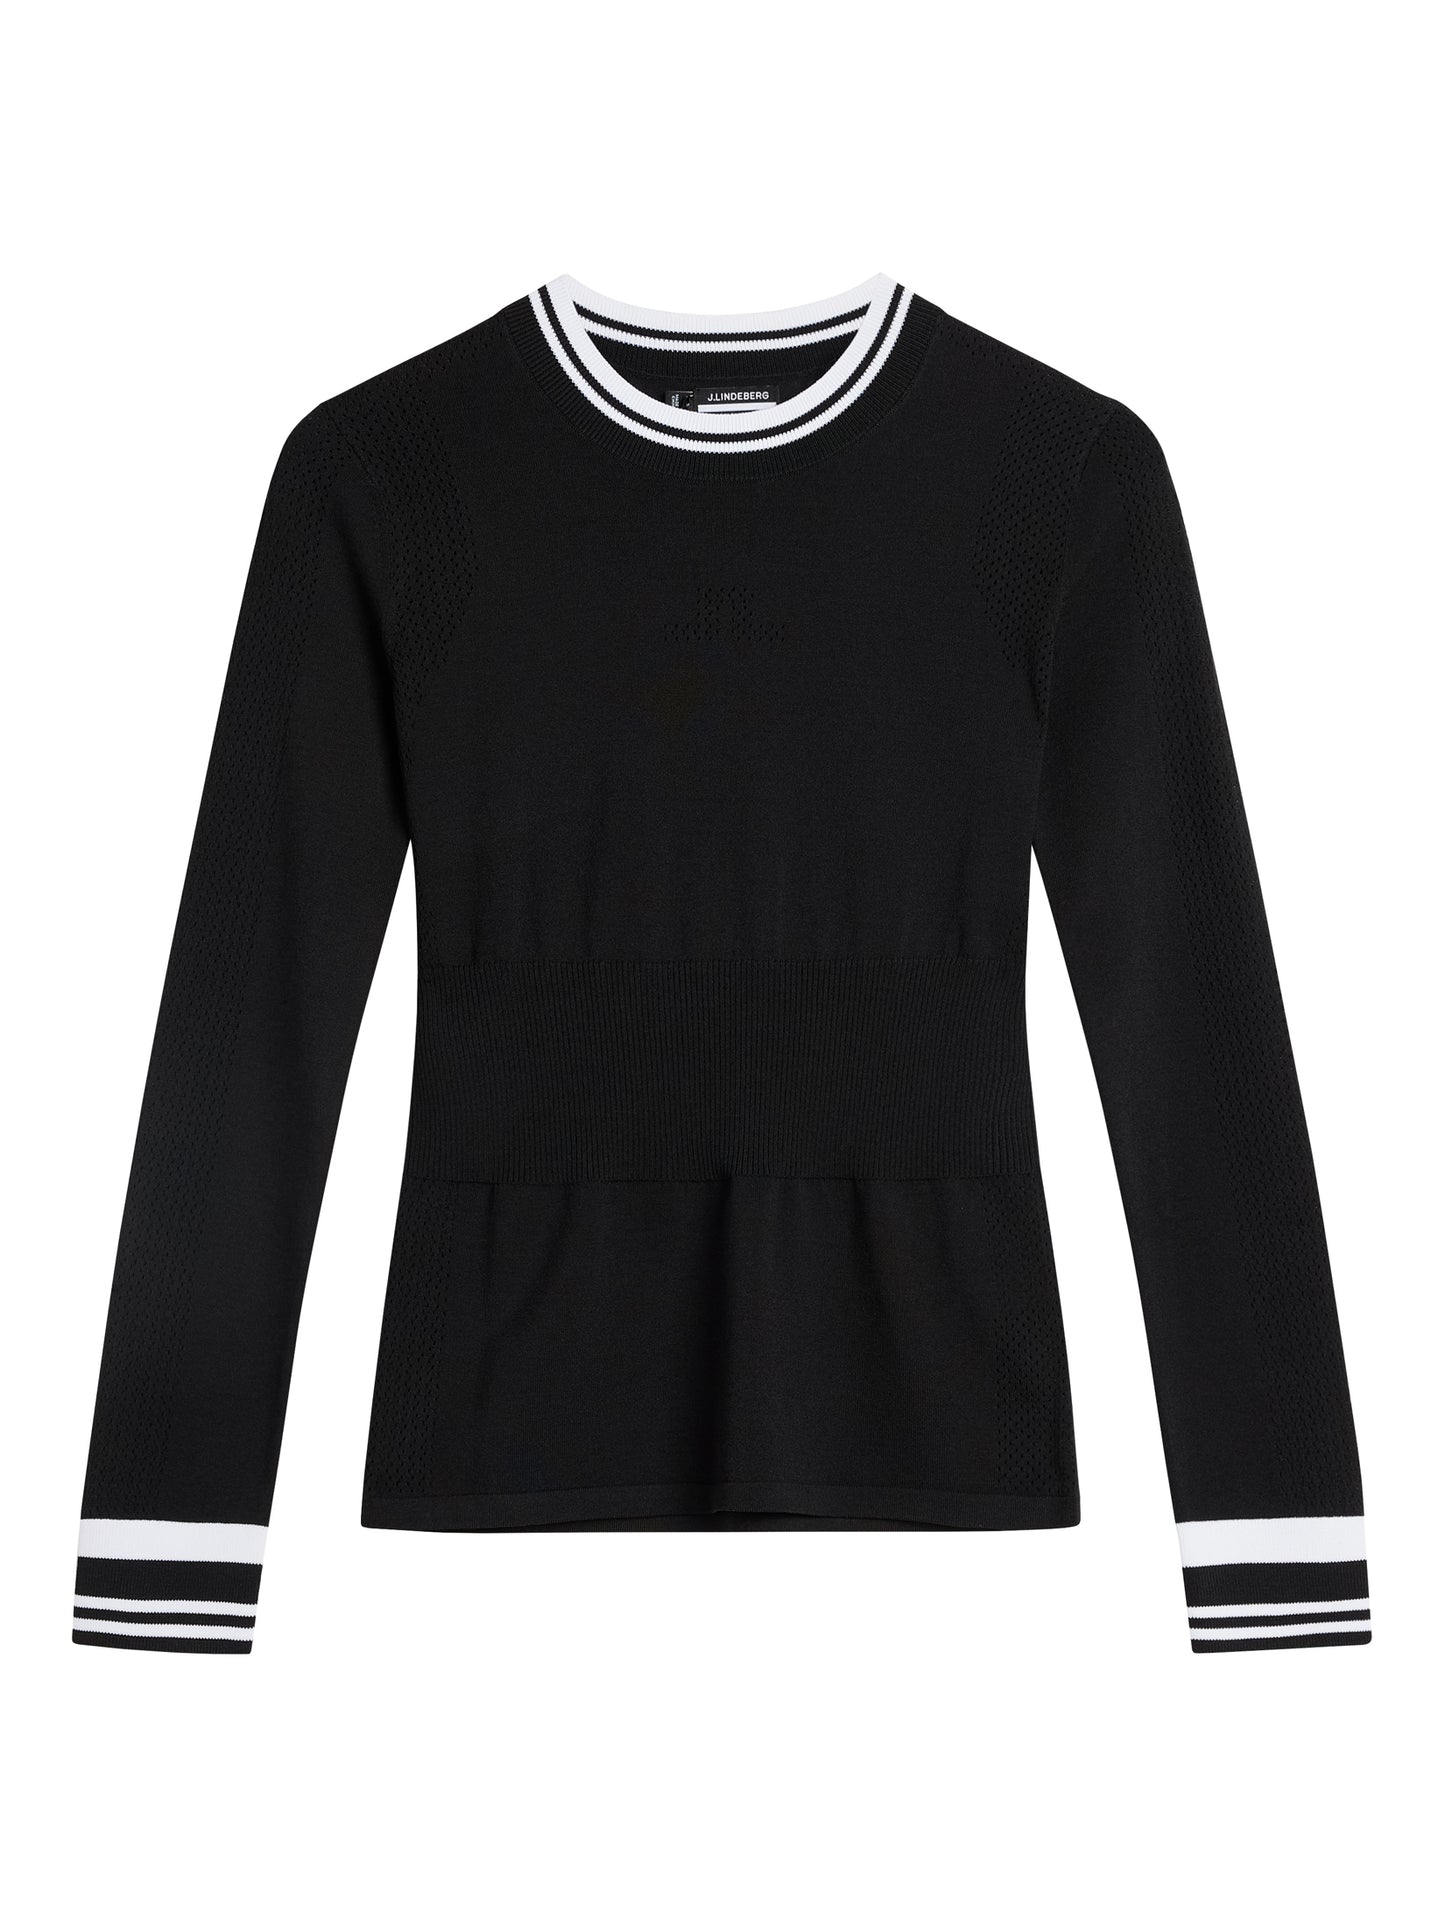 Bree Knitted Sweater / Black – J.Lindeberg